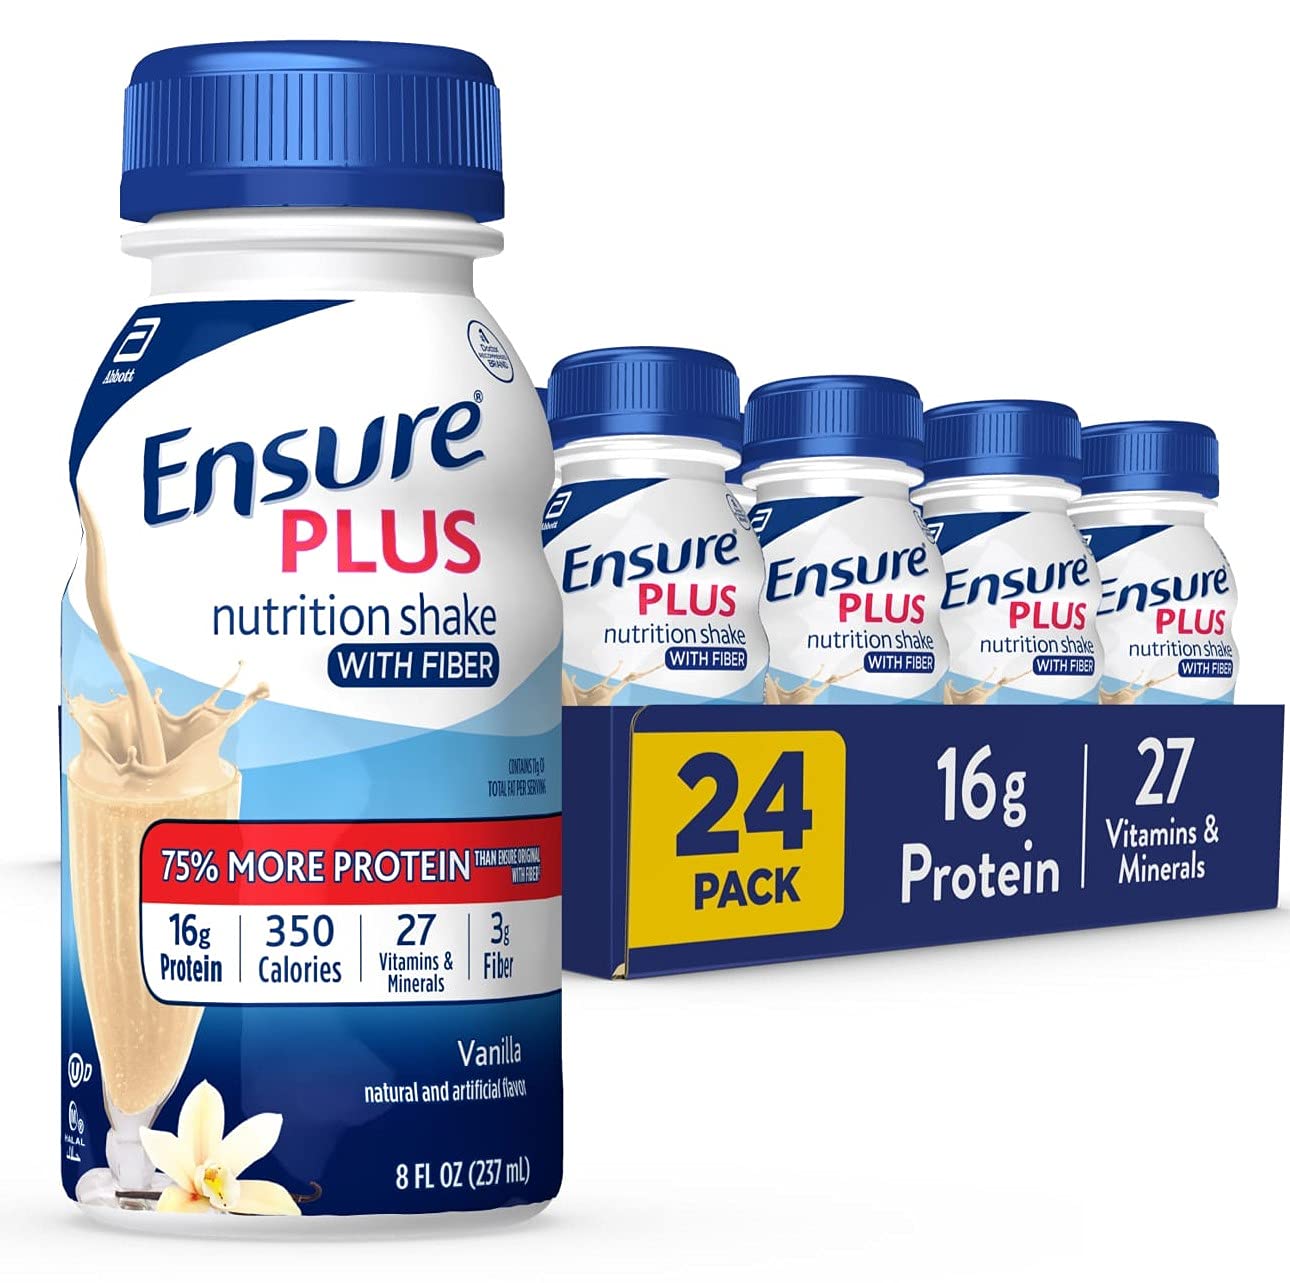 Ensure Plus Nutrition Shake with 16 grams of protein & Ensure Plus Liquid Nutrition Shake with Fiber, 16 Grams of Protein, Vanilla, 8 Fl Oz Bottle (Pack of 24)